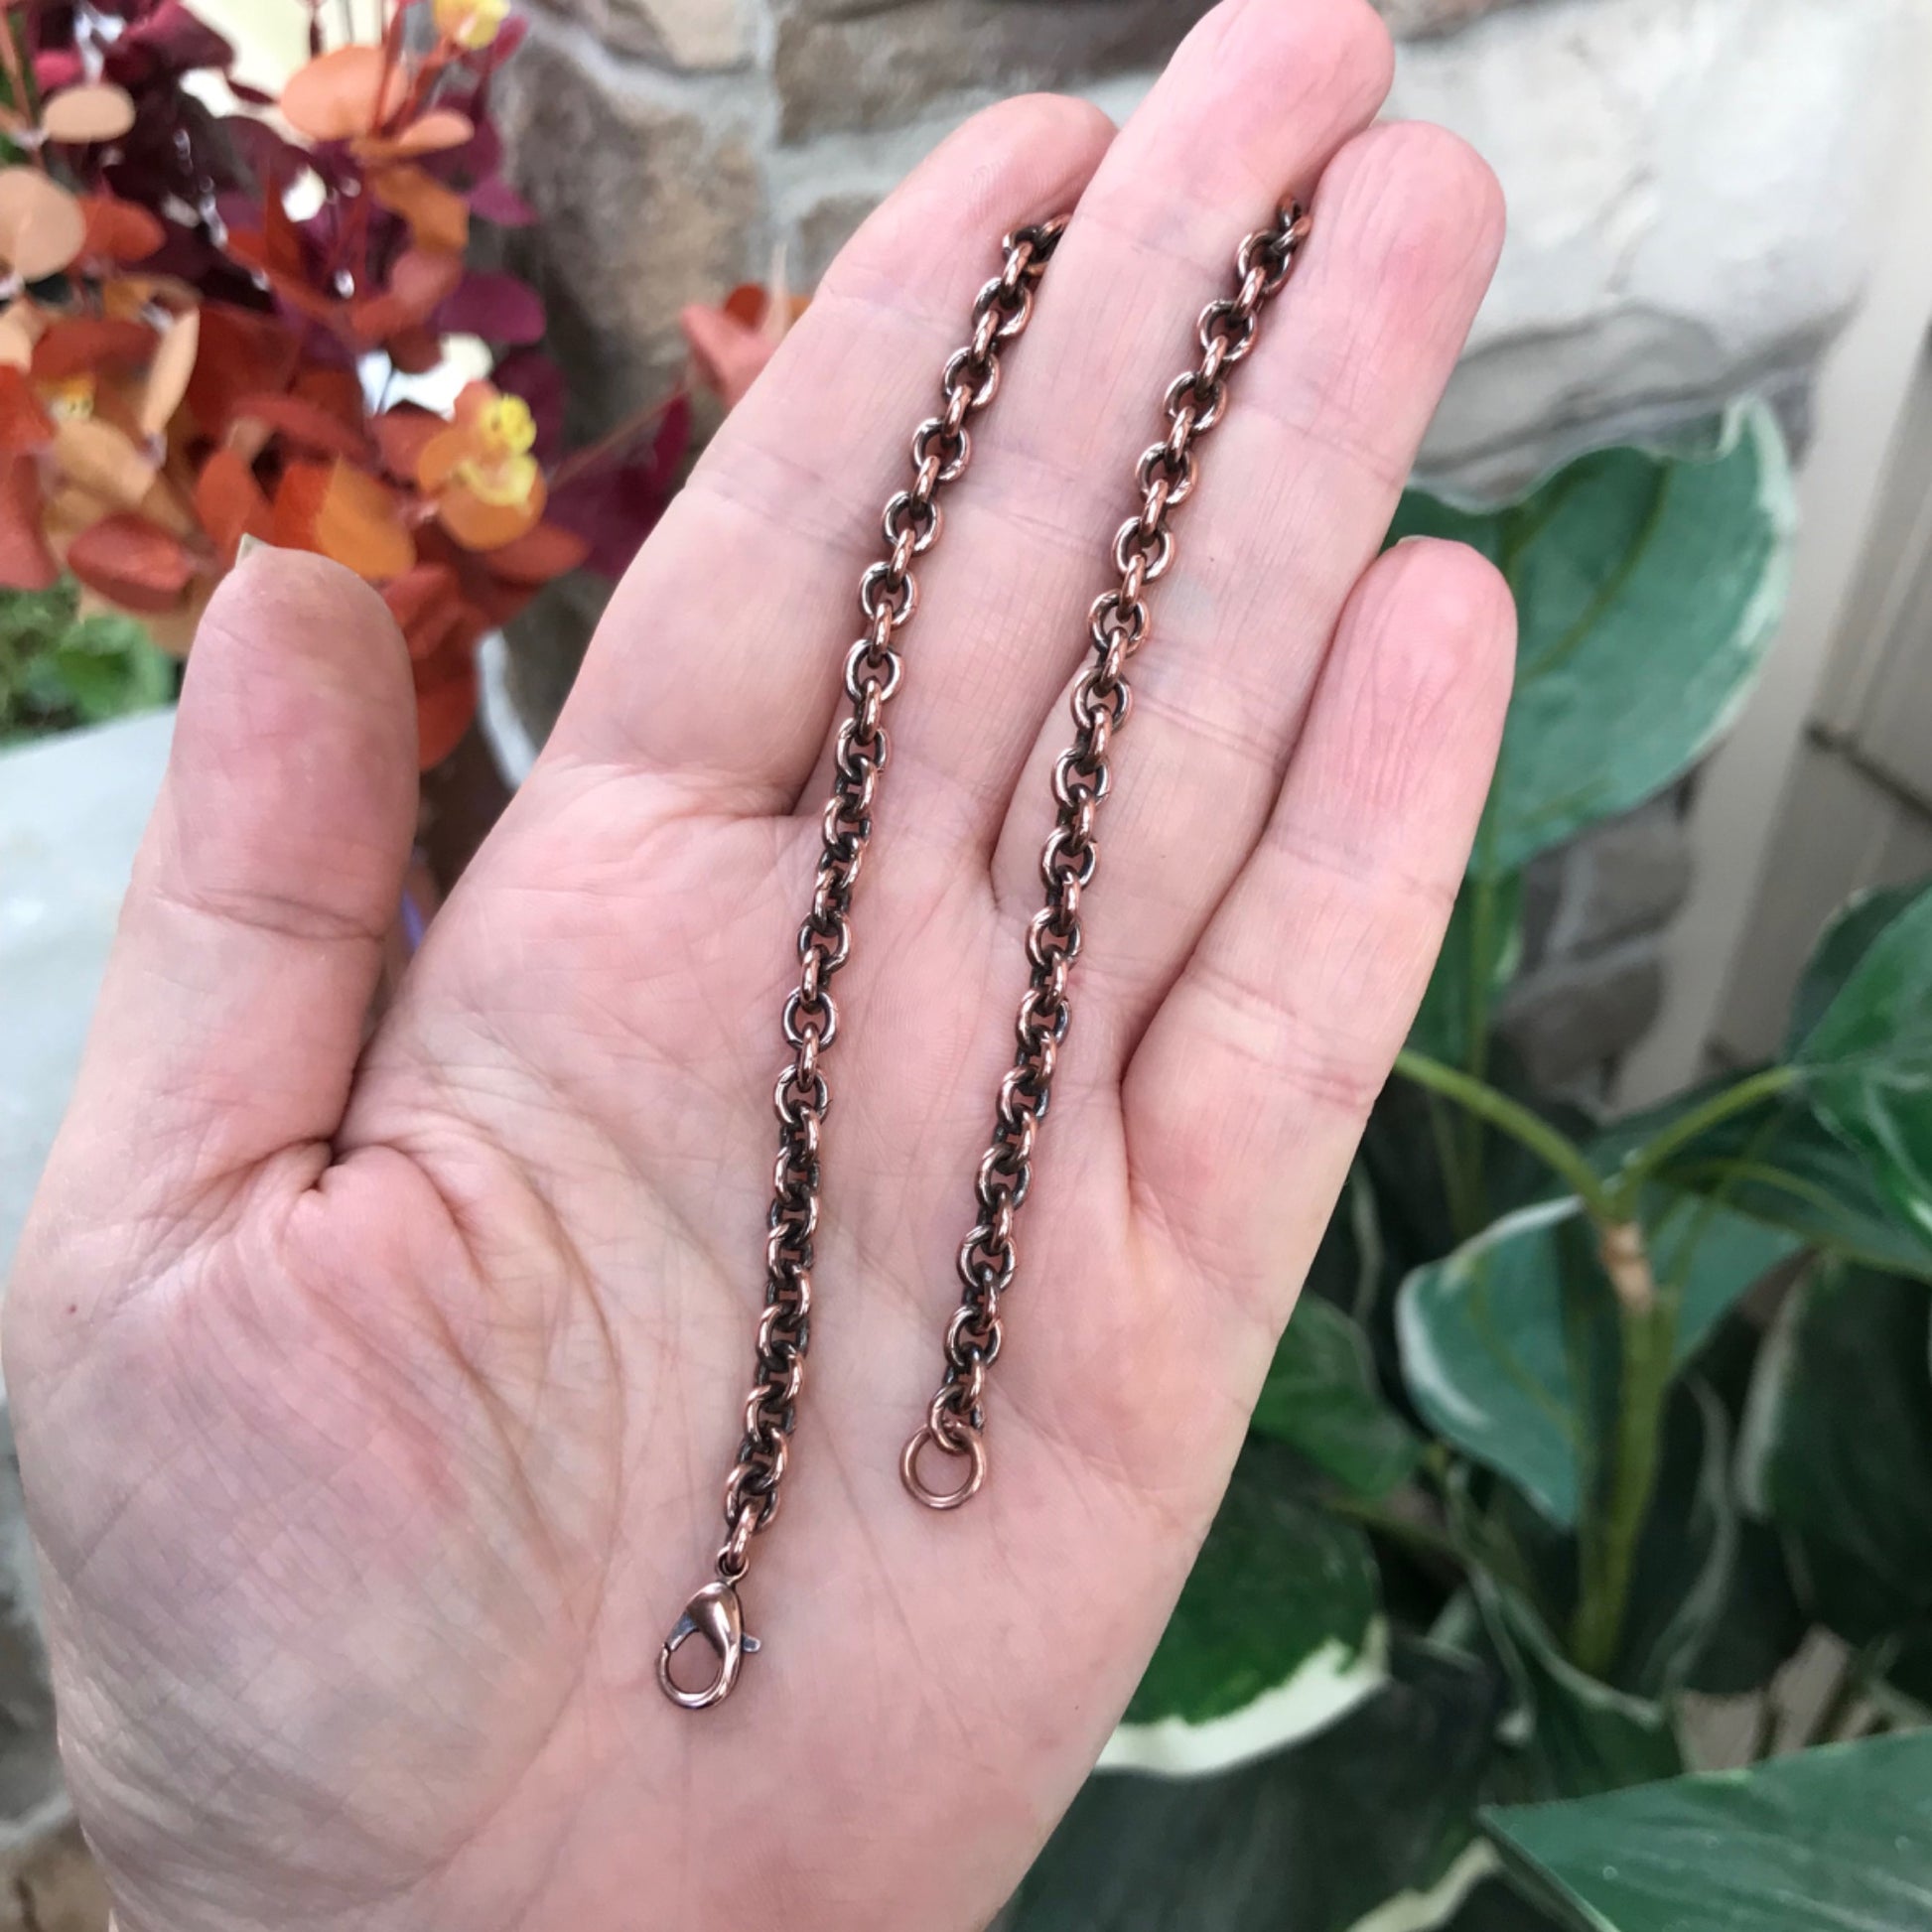 Thick 4.7mm Oxidized Copper Oval Cable Chain Necklace – Moonlet